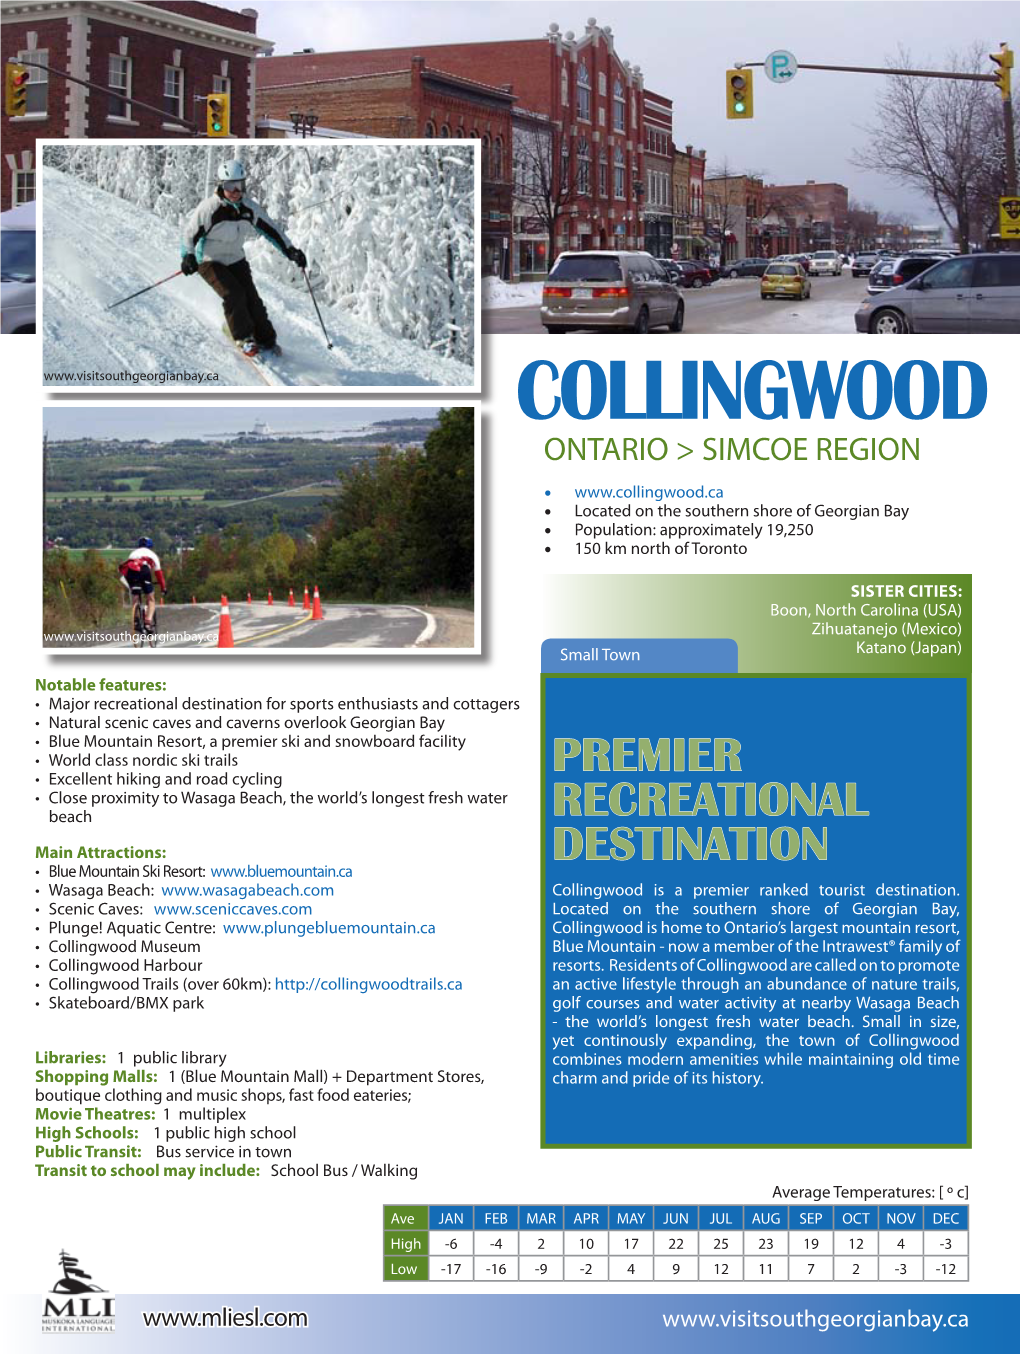 Visit and Study in Collingwood, Ontario